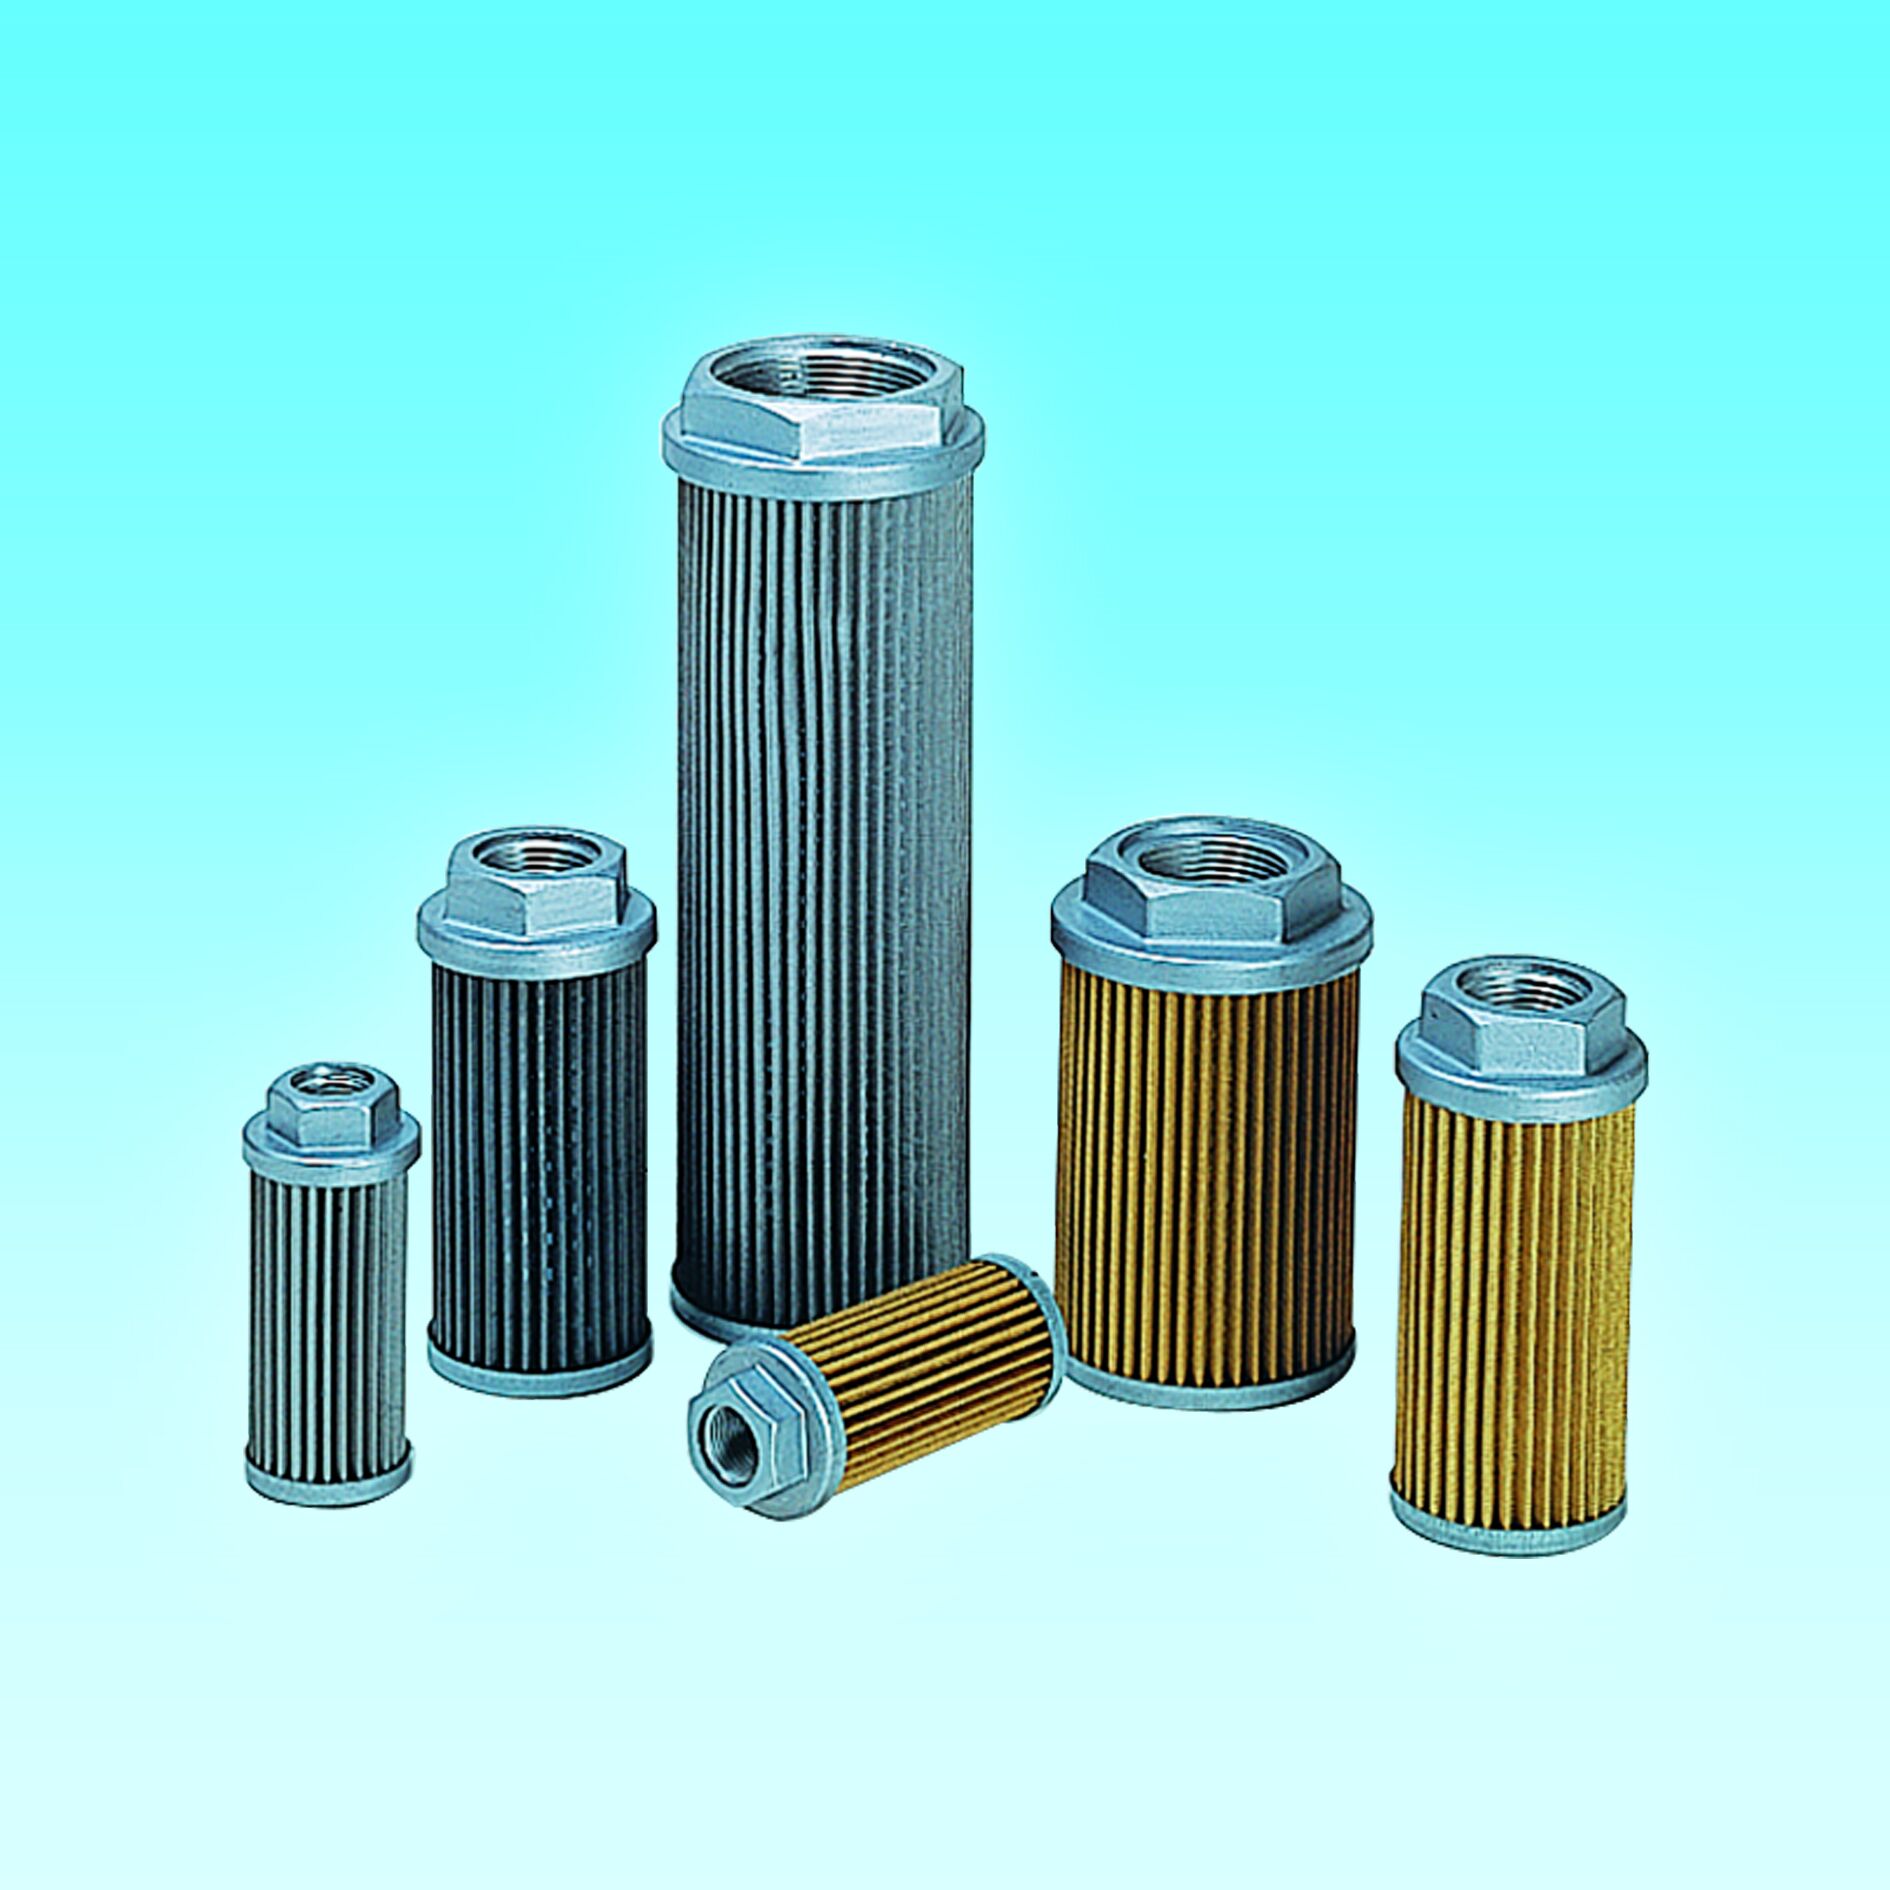 Suction strainer Filters